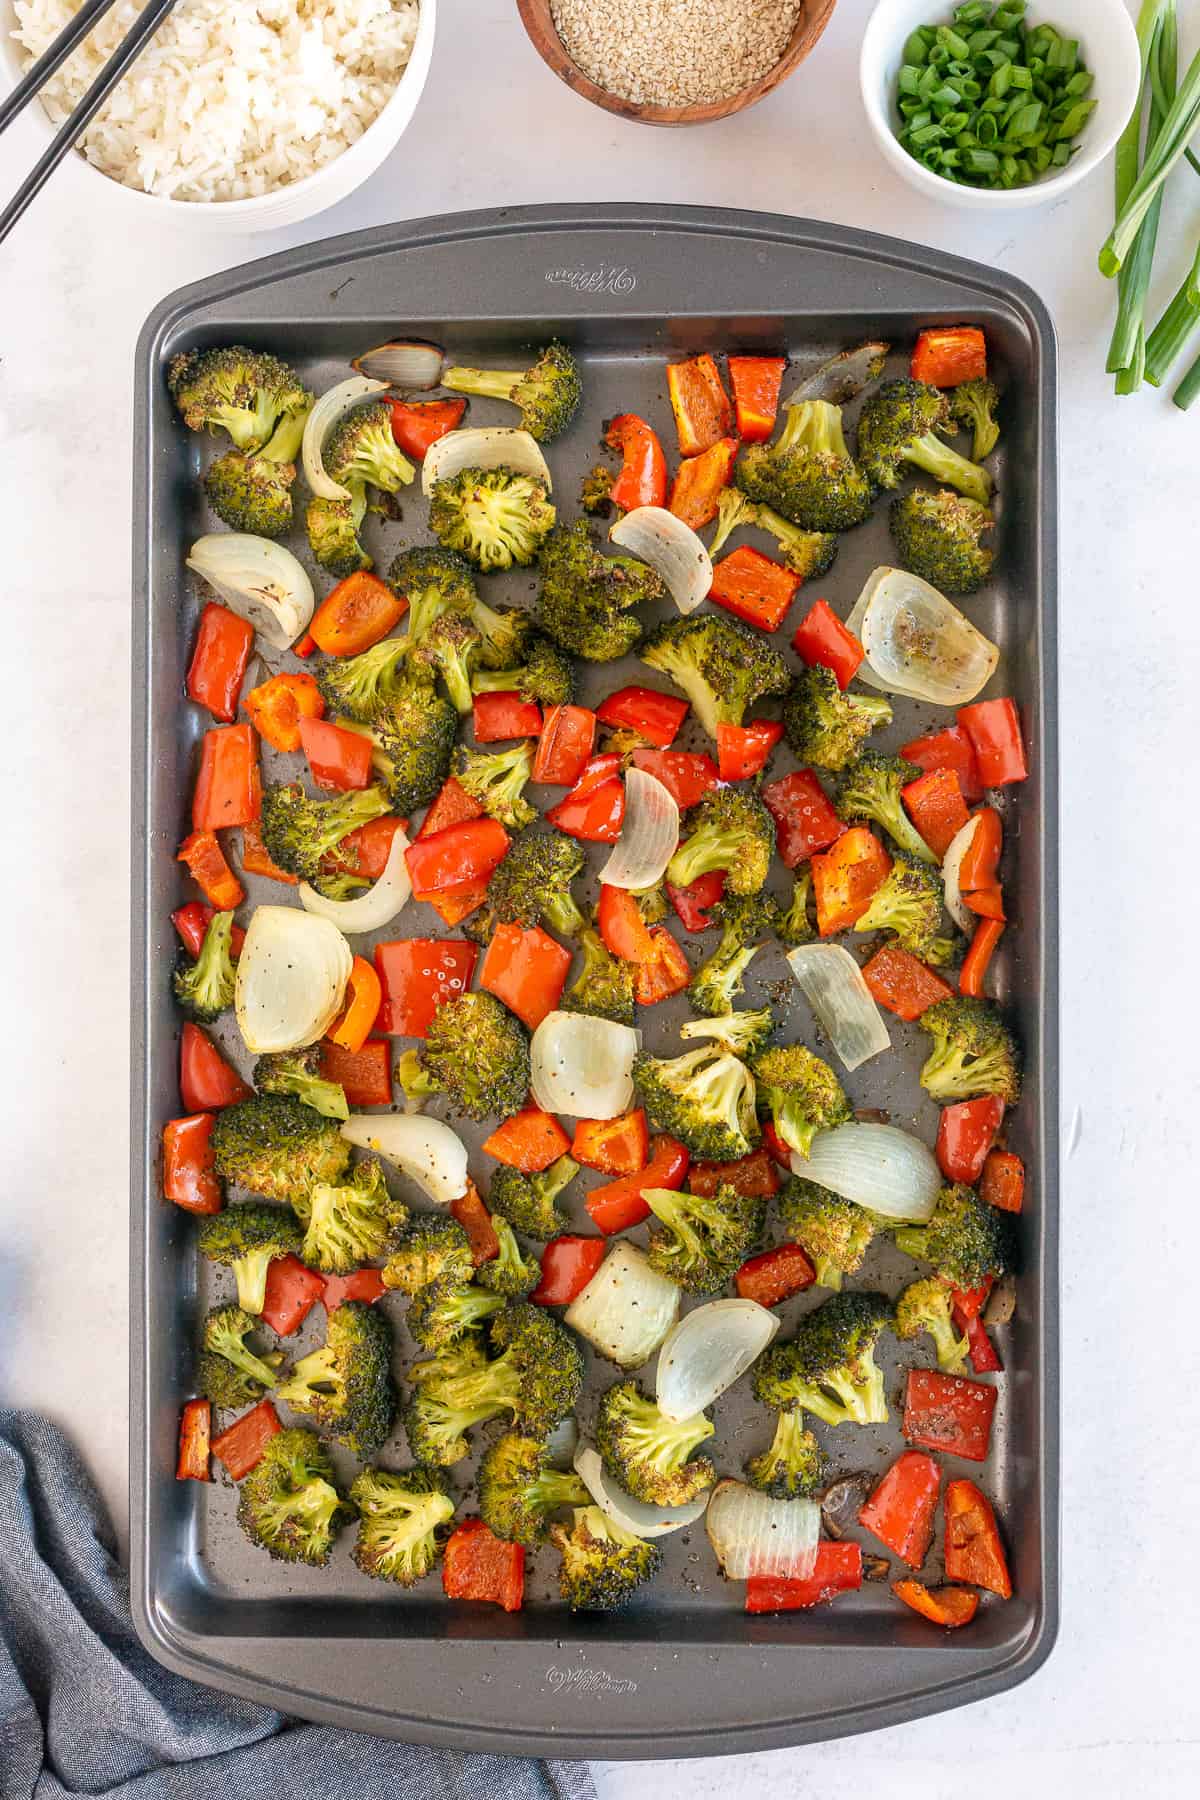 Broccoli, onion and red bell pepper on a baking sheet.